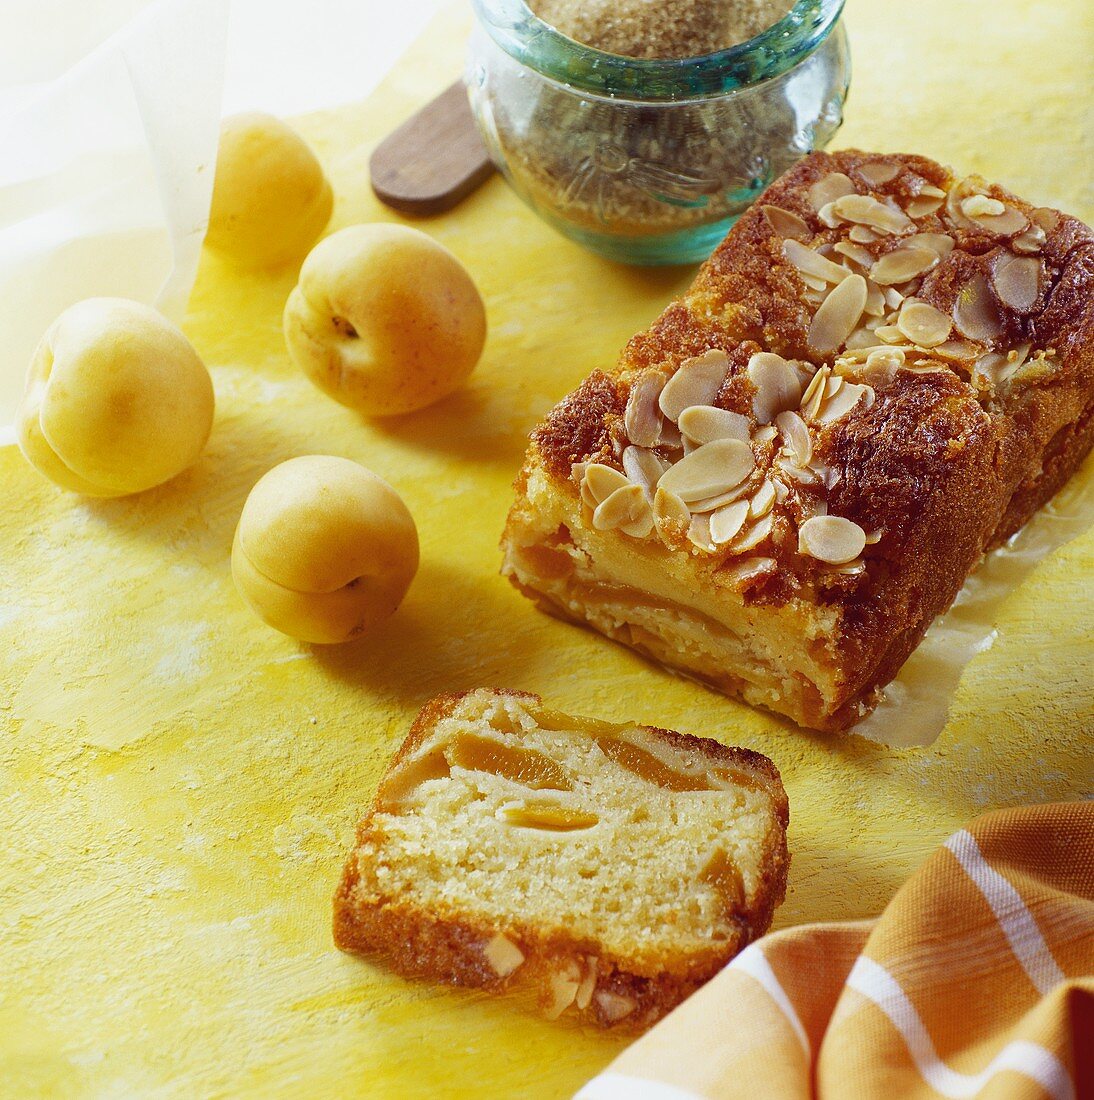 Apricot & almond cake with ingredients